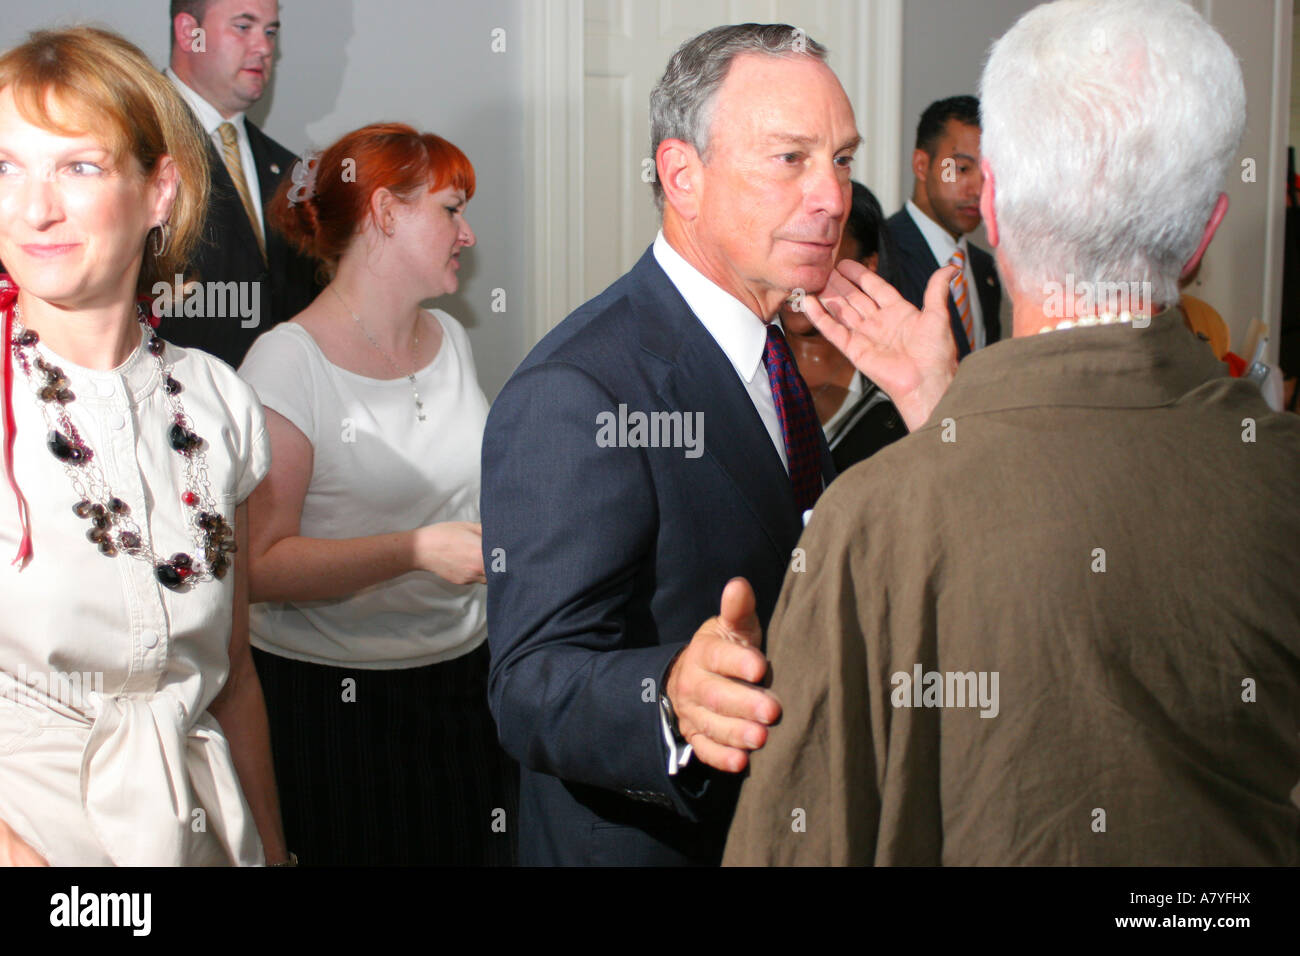 New York City mayor Michael Bloomberg greets supporters at an event in the summer of 2006 Stock Photo